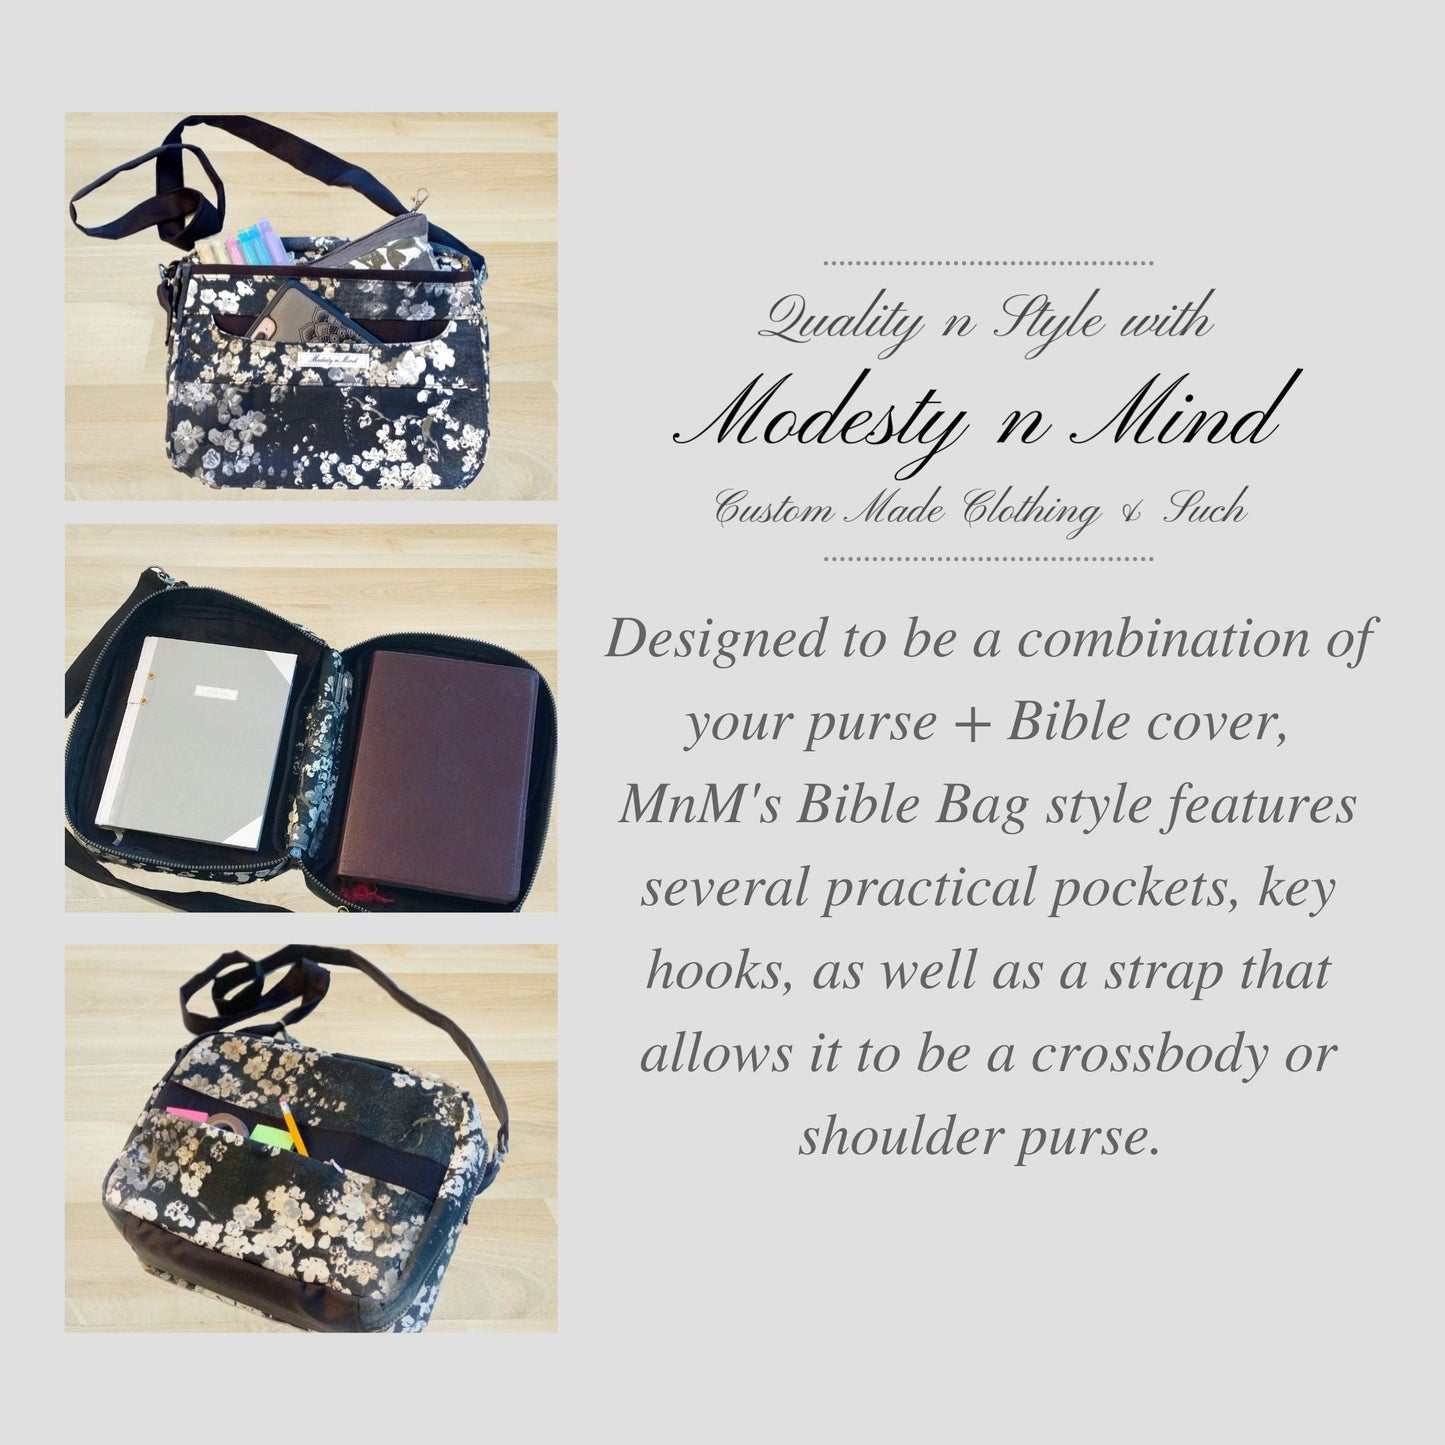 Image of Bible bag Description: Designed to be a combination of a purse + Bible cover, the Bible Bag style features several practical pockets, key hooks, & a strap that allows it to be worn as a crossbody or shoulder purse.